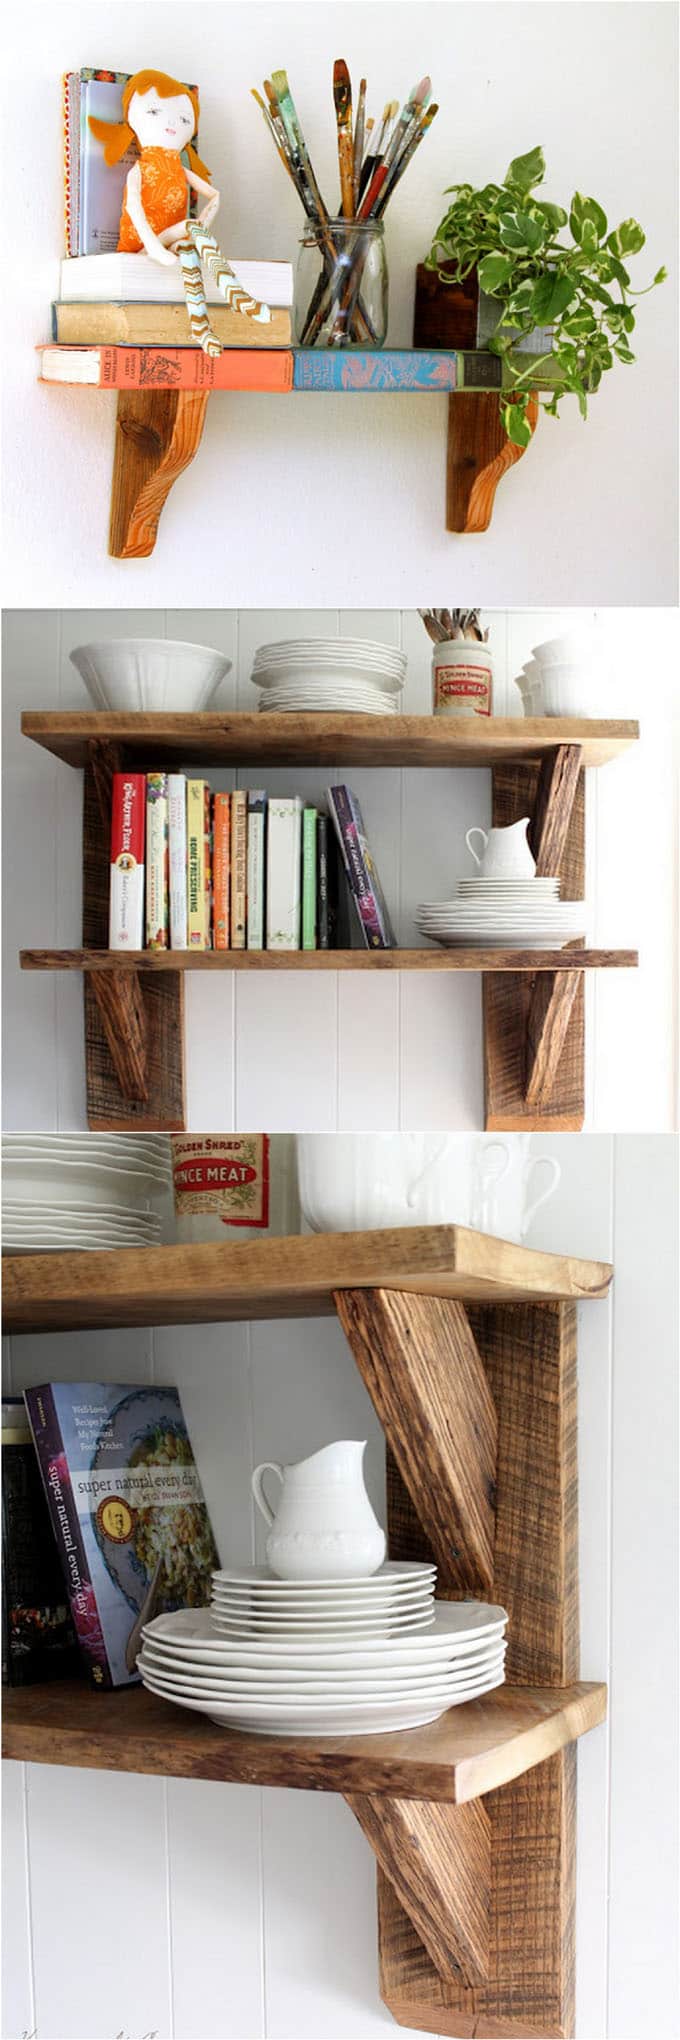 Diy Floating Shelves Wall, How To Build A Wall Of Shelves